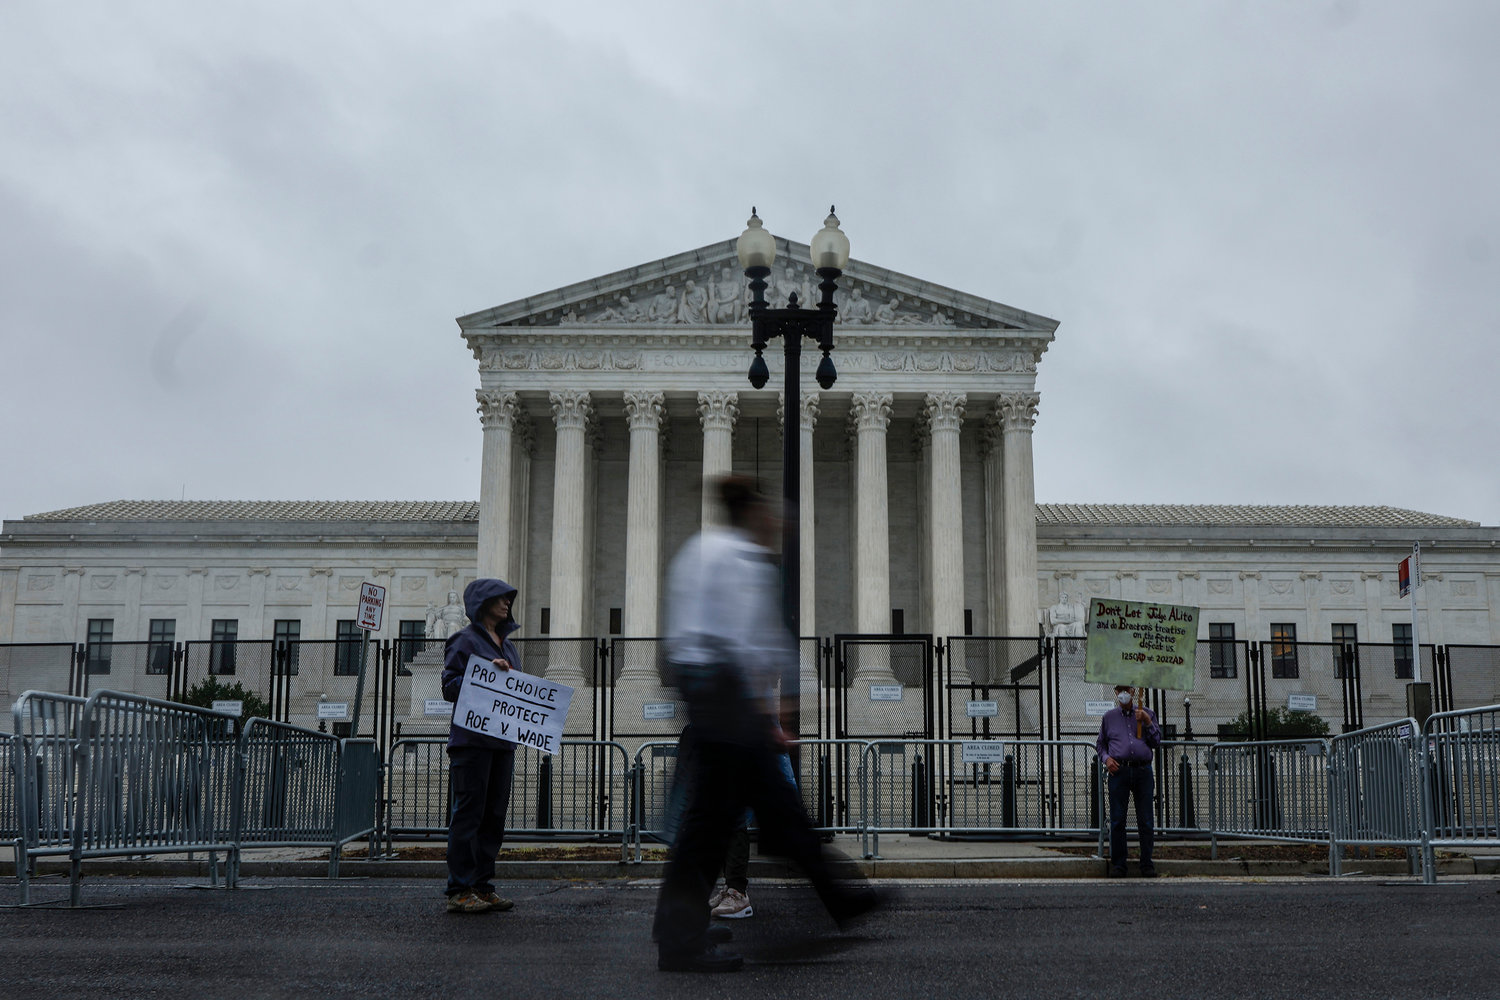 People walk past the U.S. Supreme Court Building during a rainstorm on June 23, 2022 in Washington, D.C. (Anna Moneymaker/Getty Images/TNS)